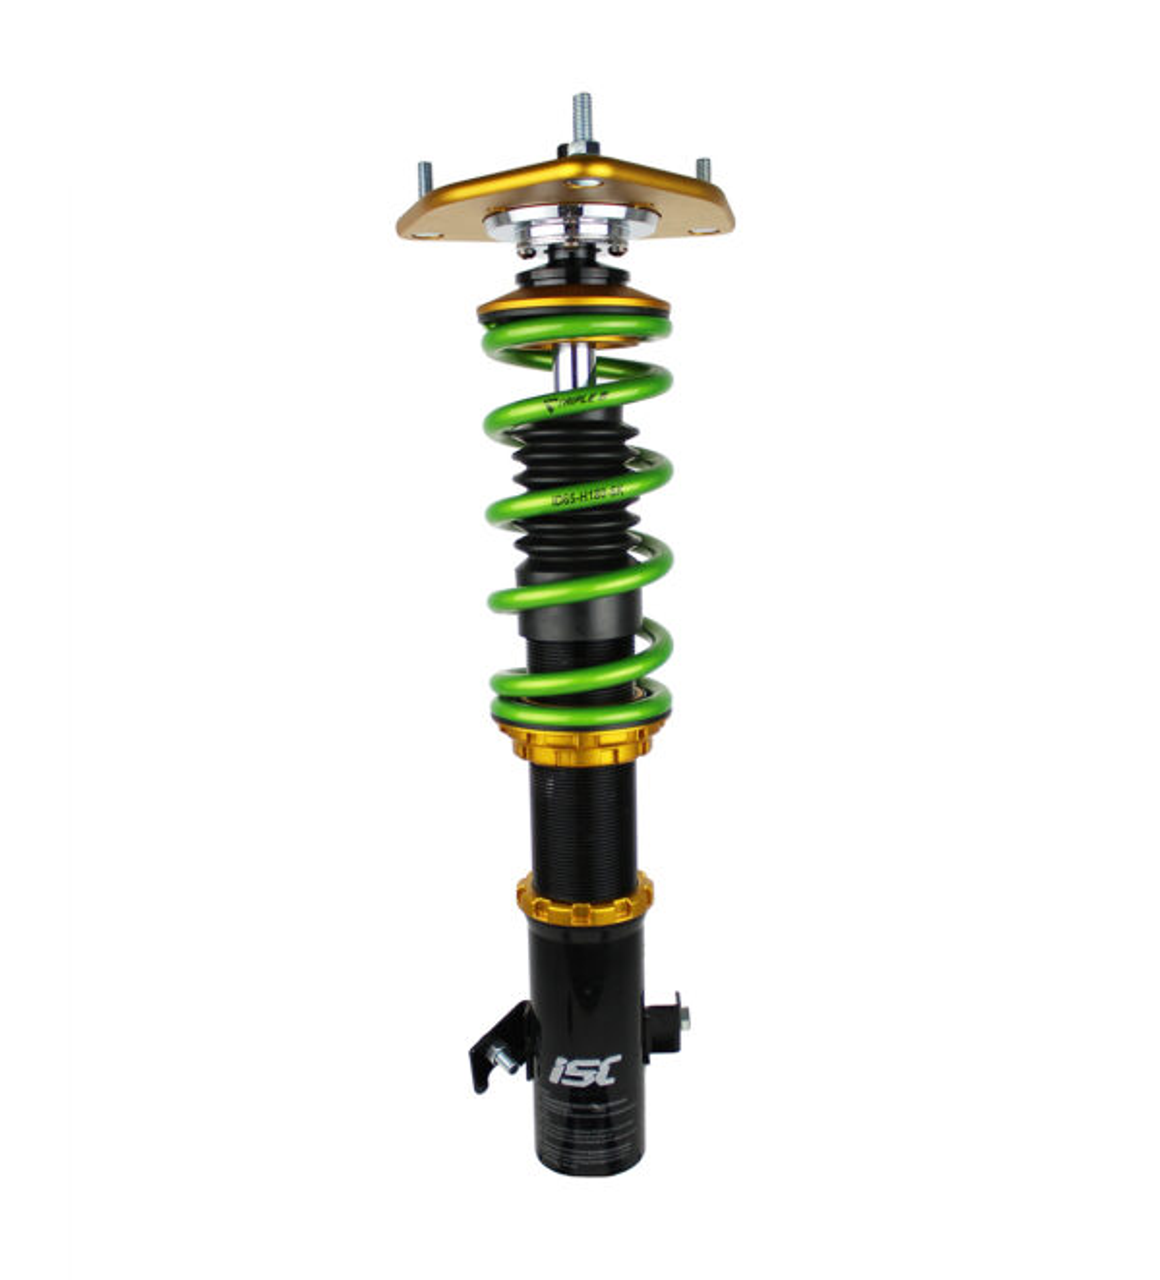 TOYOTA CAMRY (91-97) ISC V2 BASIC COILOVER SUSPENSION
Front Triple S Spring Upgrade - Rear Triple S Spring Upgrade
Street Comfort/Sport Suggested Spring Rates